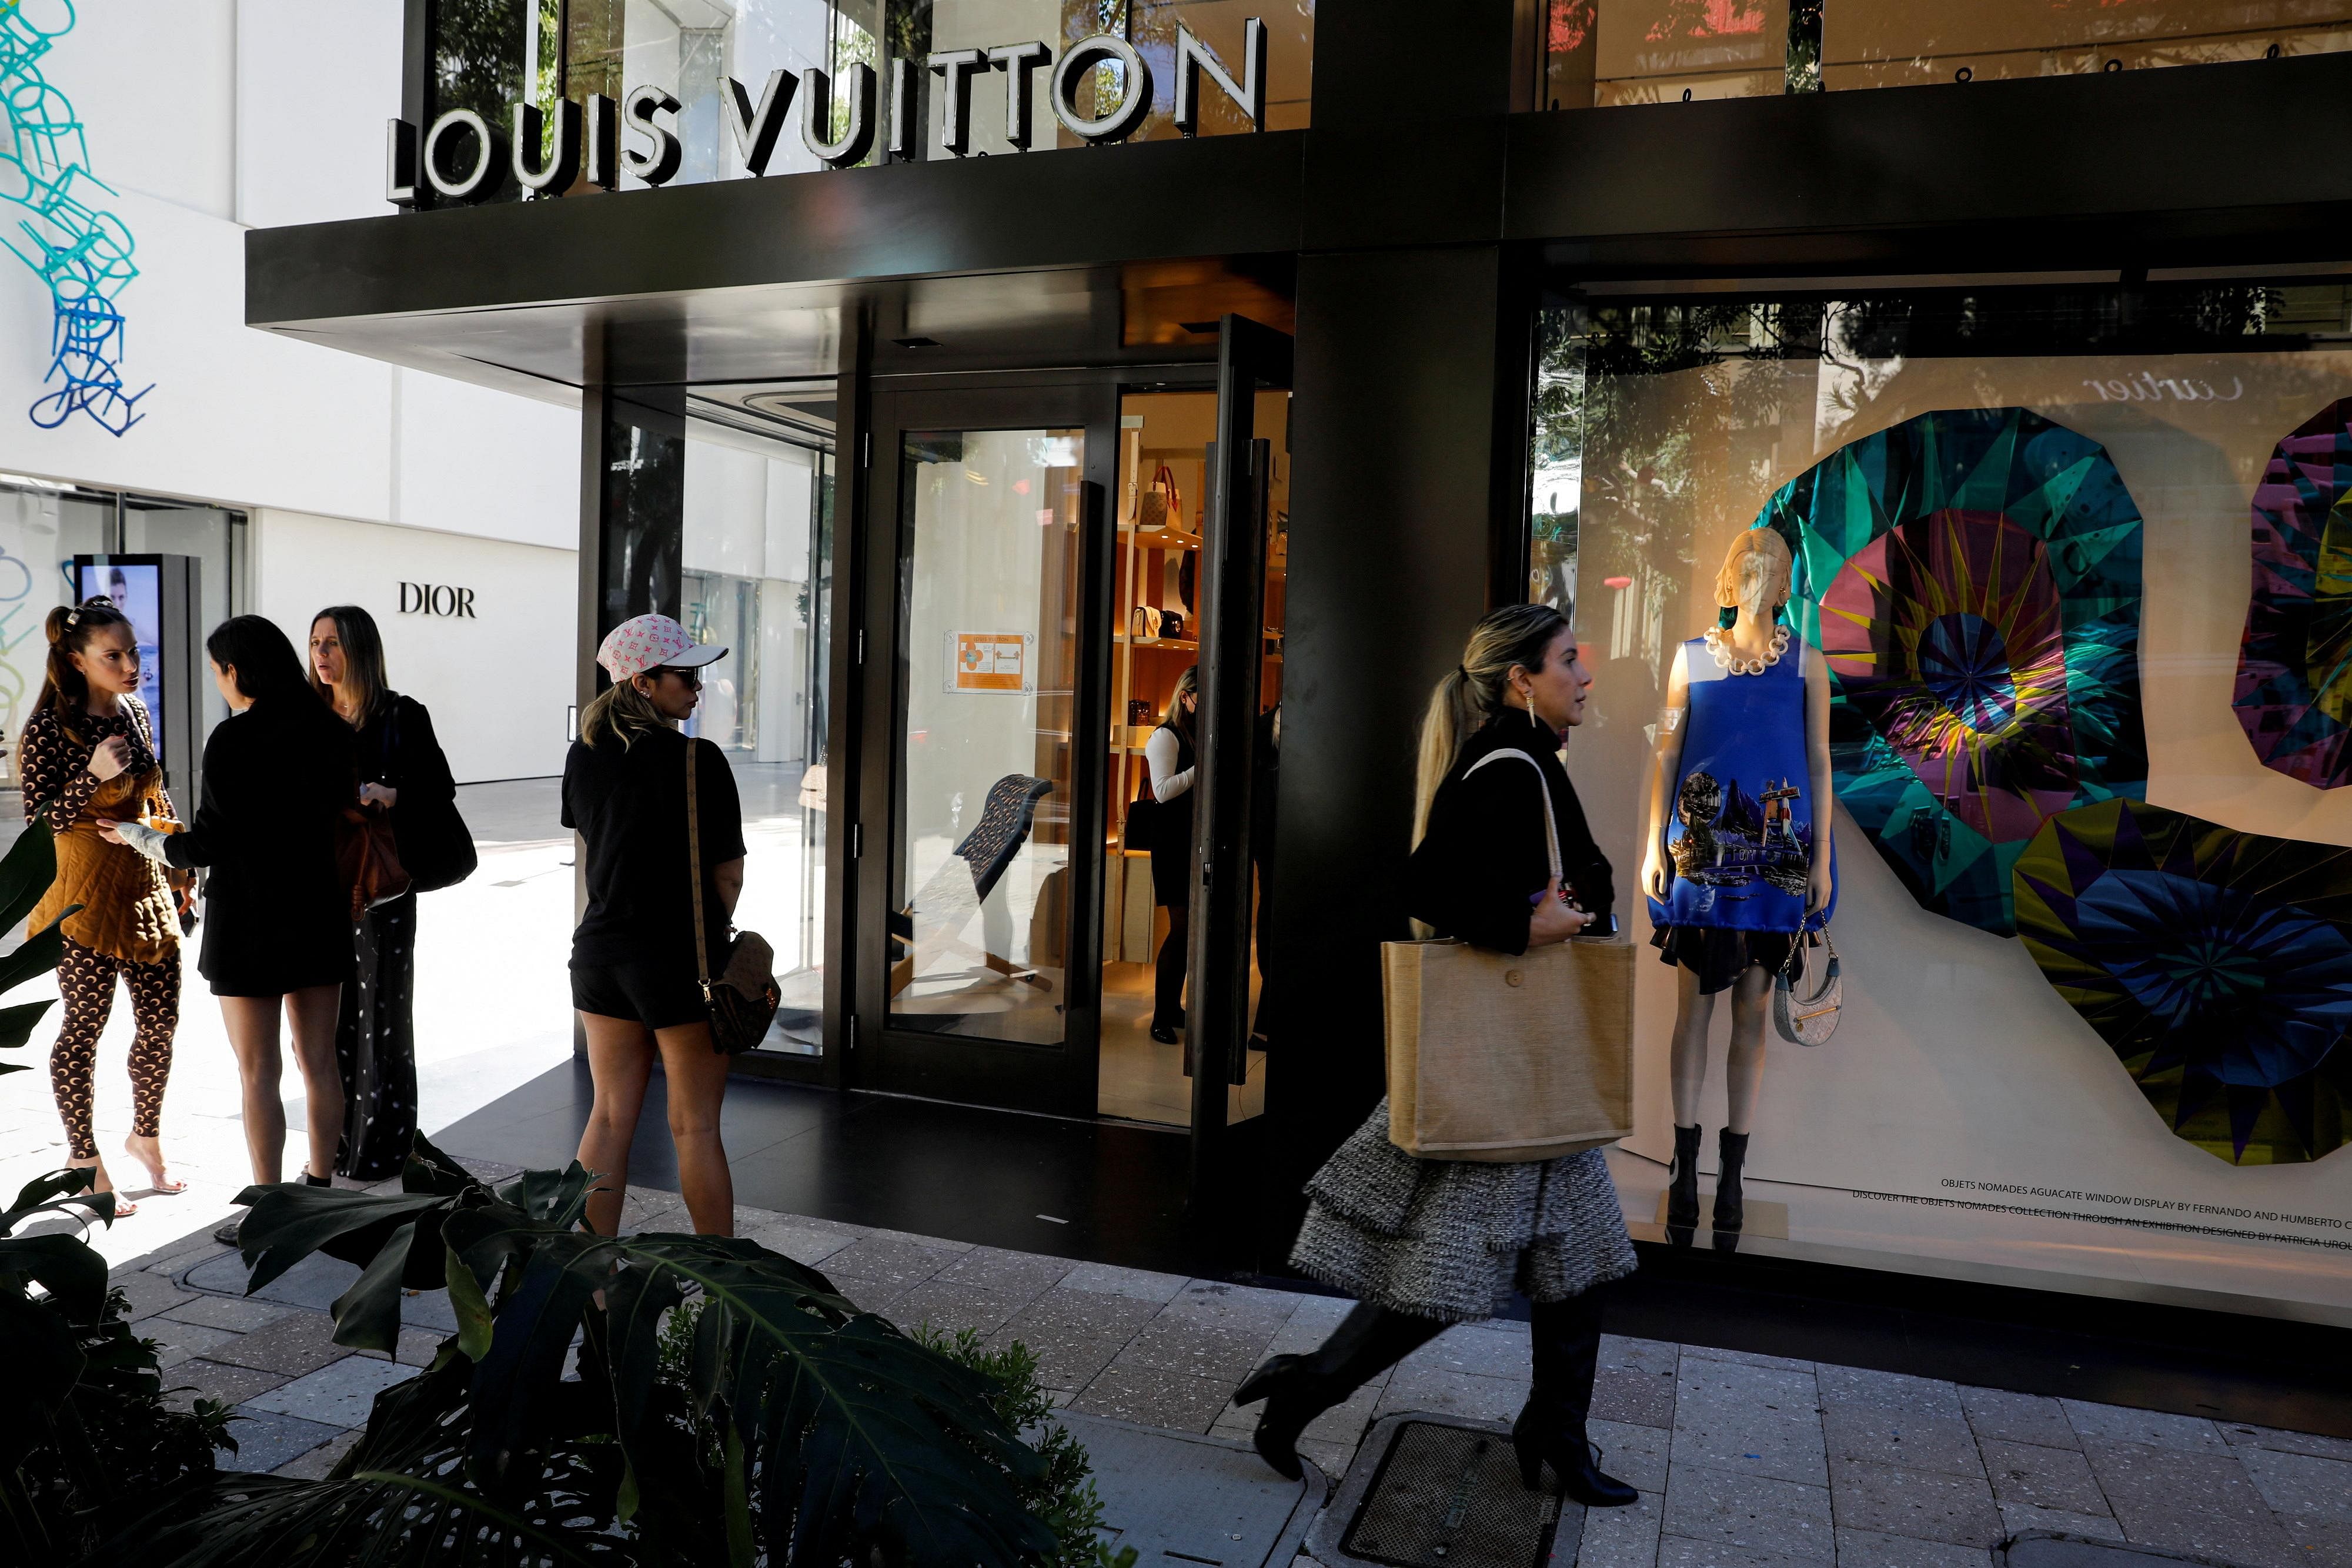 LVMH shares hit as slowdown prompts fears of end to 'roaring 20s